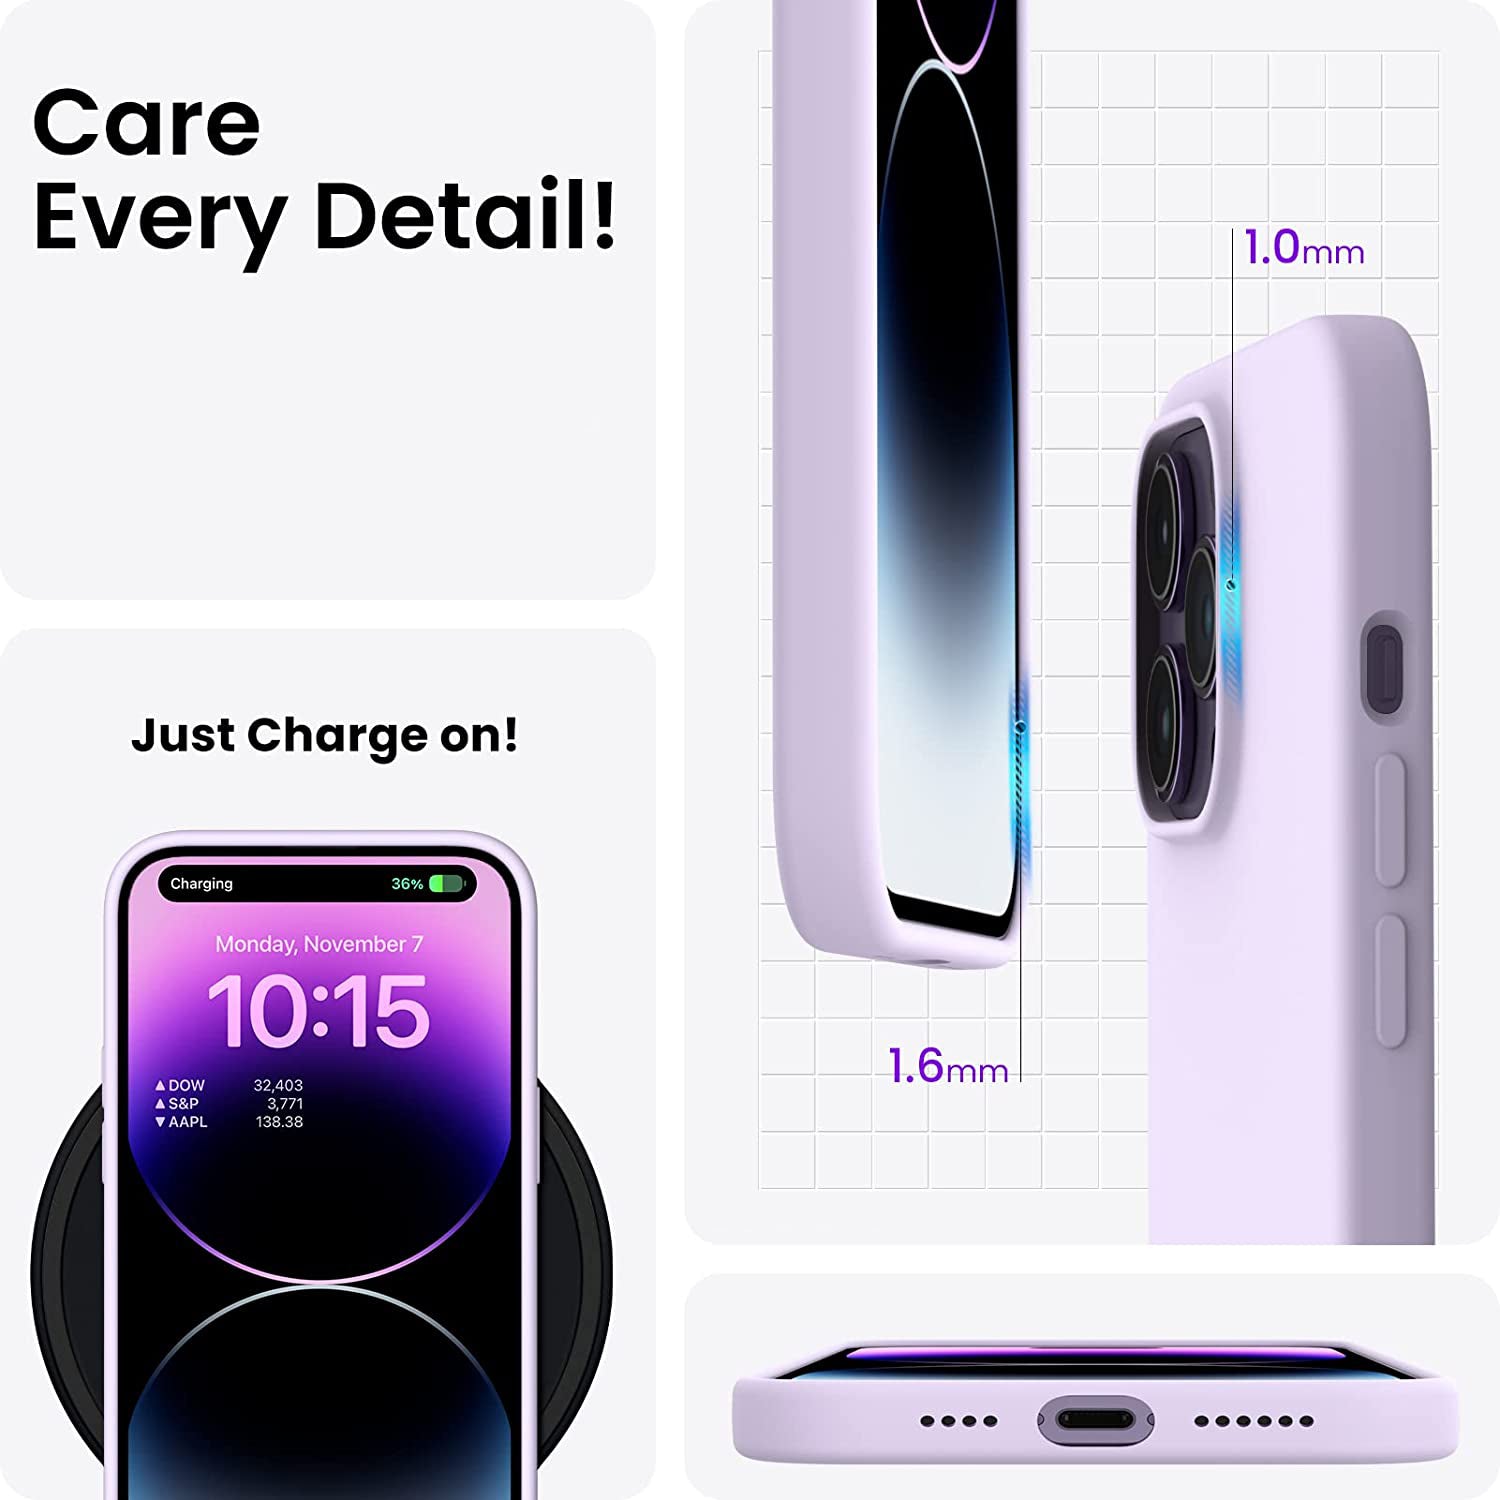 Liquid Silicone Case For Apple iPhone 14 Pro Max Luxury Thin Phone Cover Liliac Purple-First Help Tech